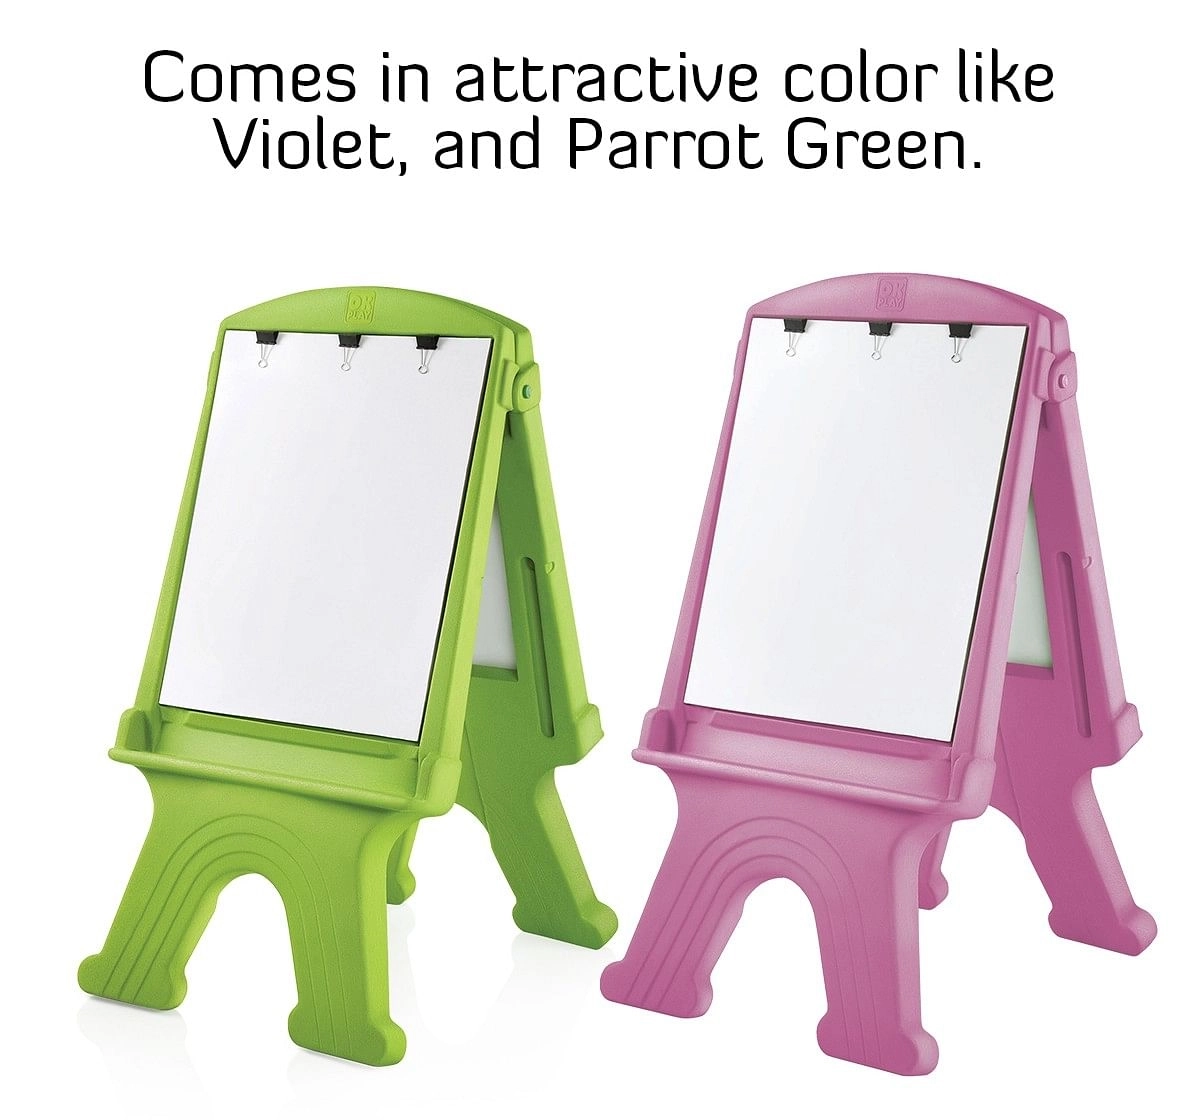 Ok Play Easel Grand Easel for Kids Drawing Writing Green 5Y+